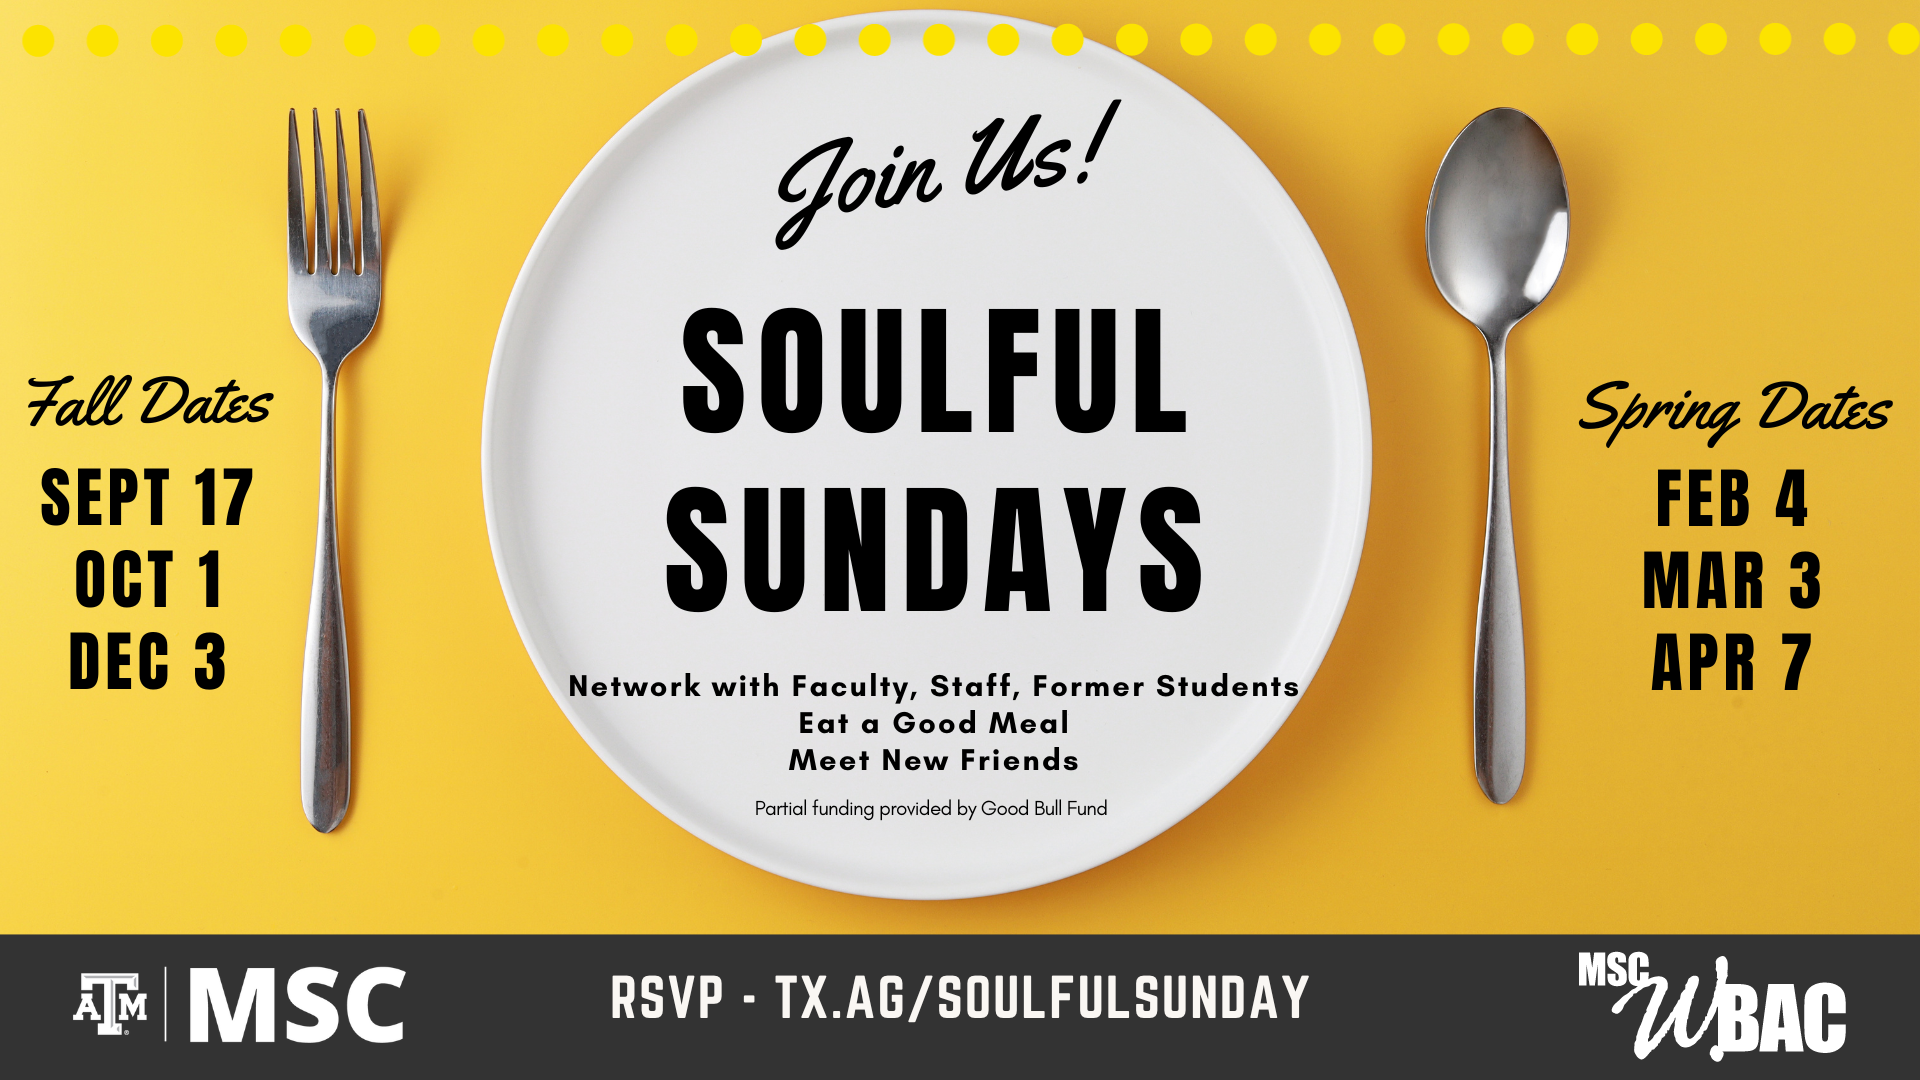 MSC WBAC presents: Soulful Sundays. Network with faculty, Staff, Former Students. Eat a good meal and meet new friends. Partial funding provided by Good Bull Fund. Fall Dates: September 17th, October 1st, December 3rd. Spring Dates: February 4th, March 3rd and April 7th. RSVP: Tx.ag/soulfulsunday